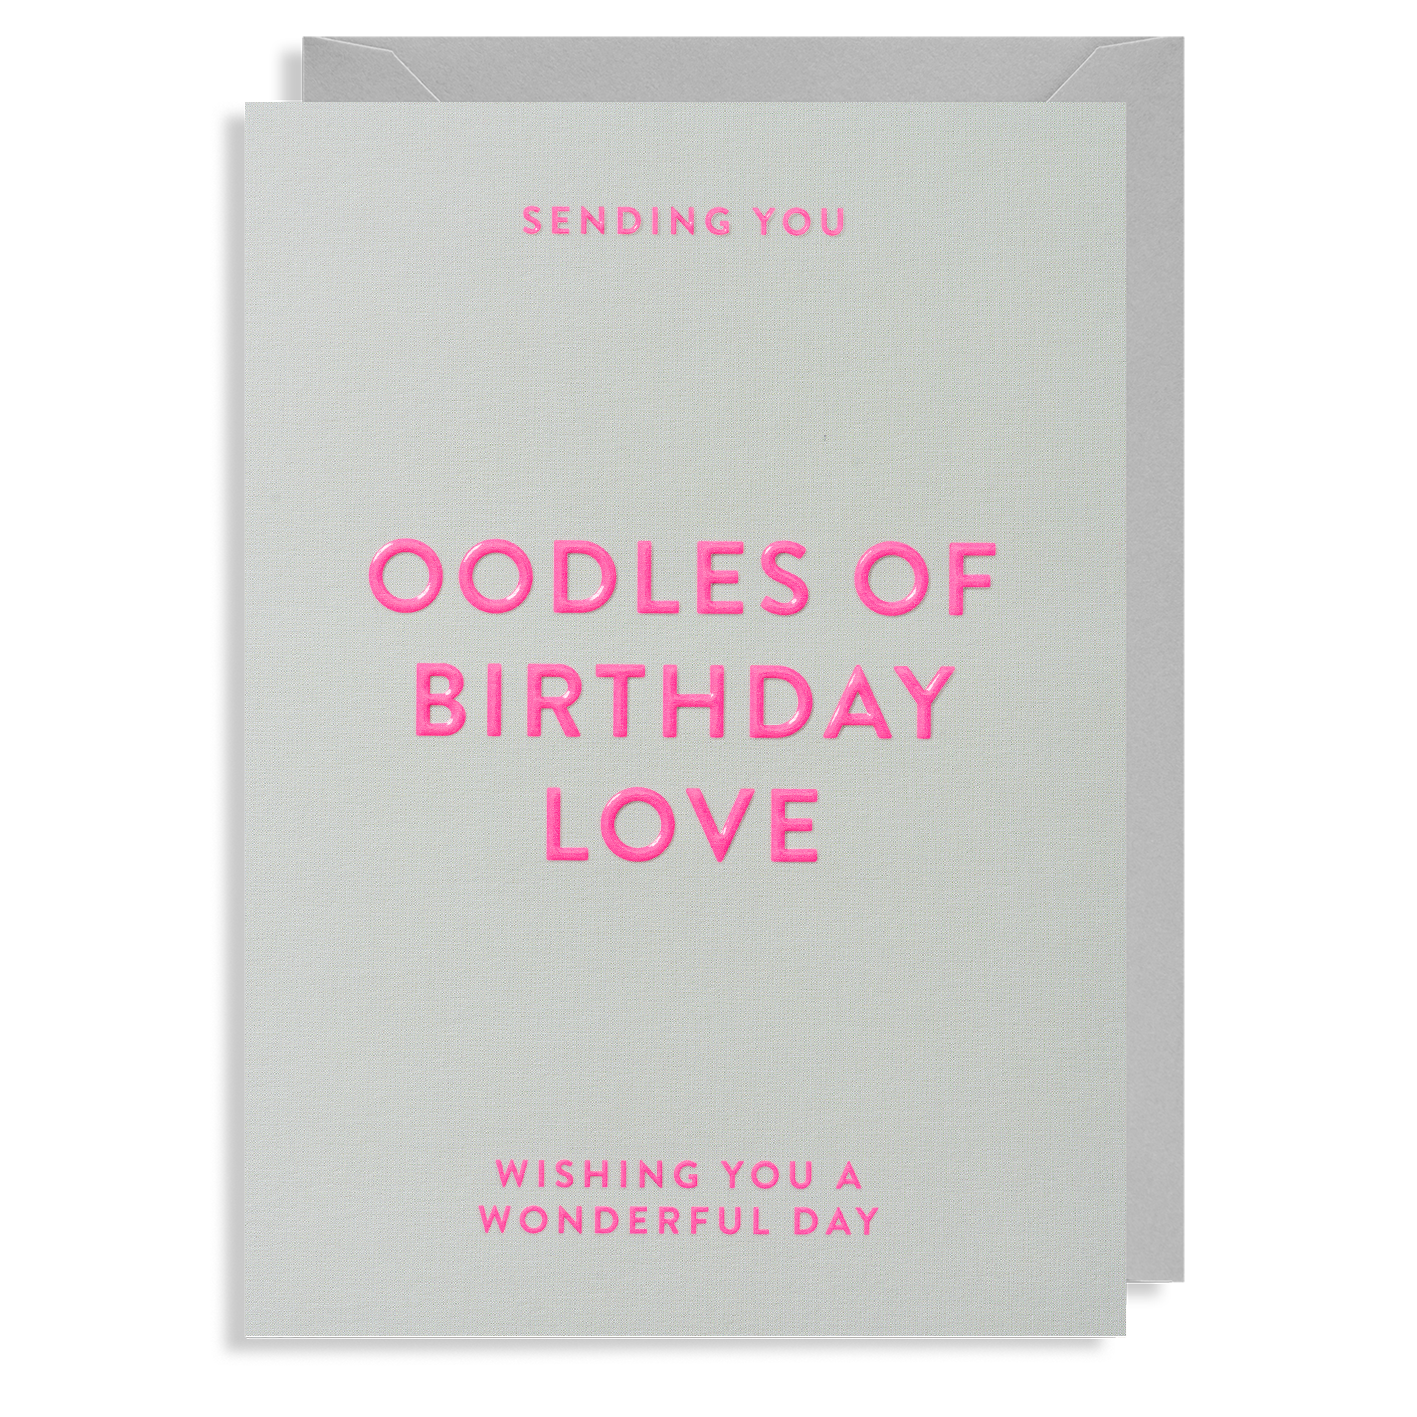 Oodles of Birthday Love By Lagom